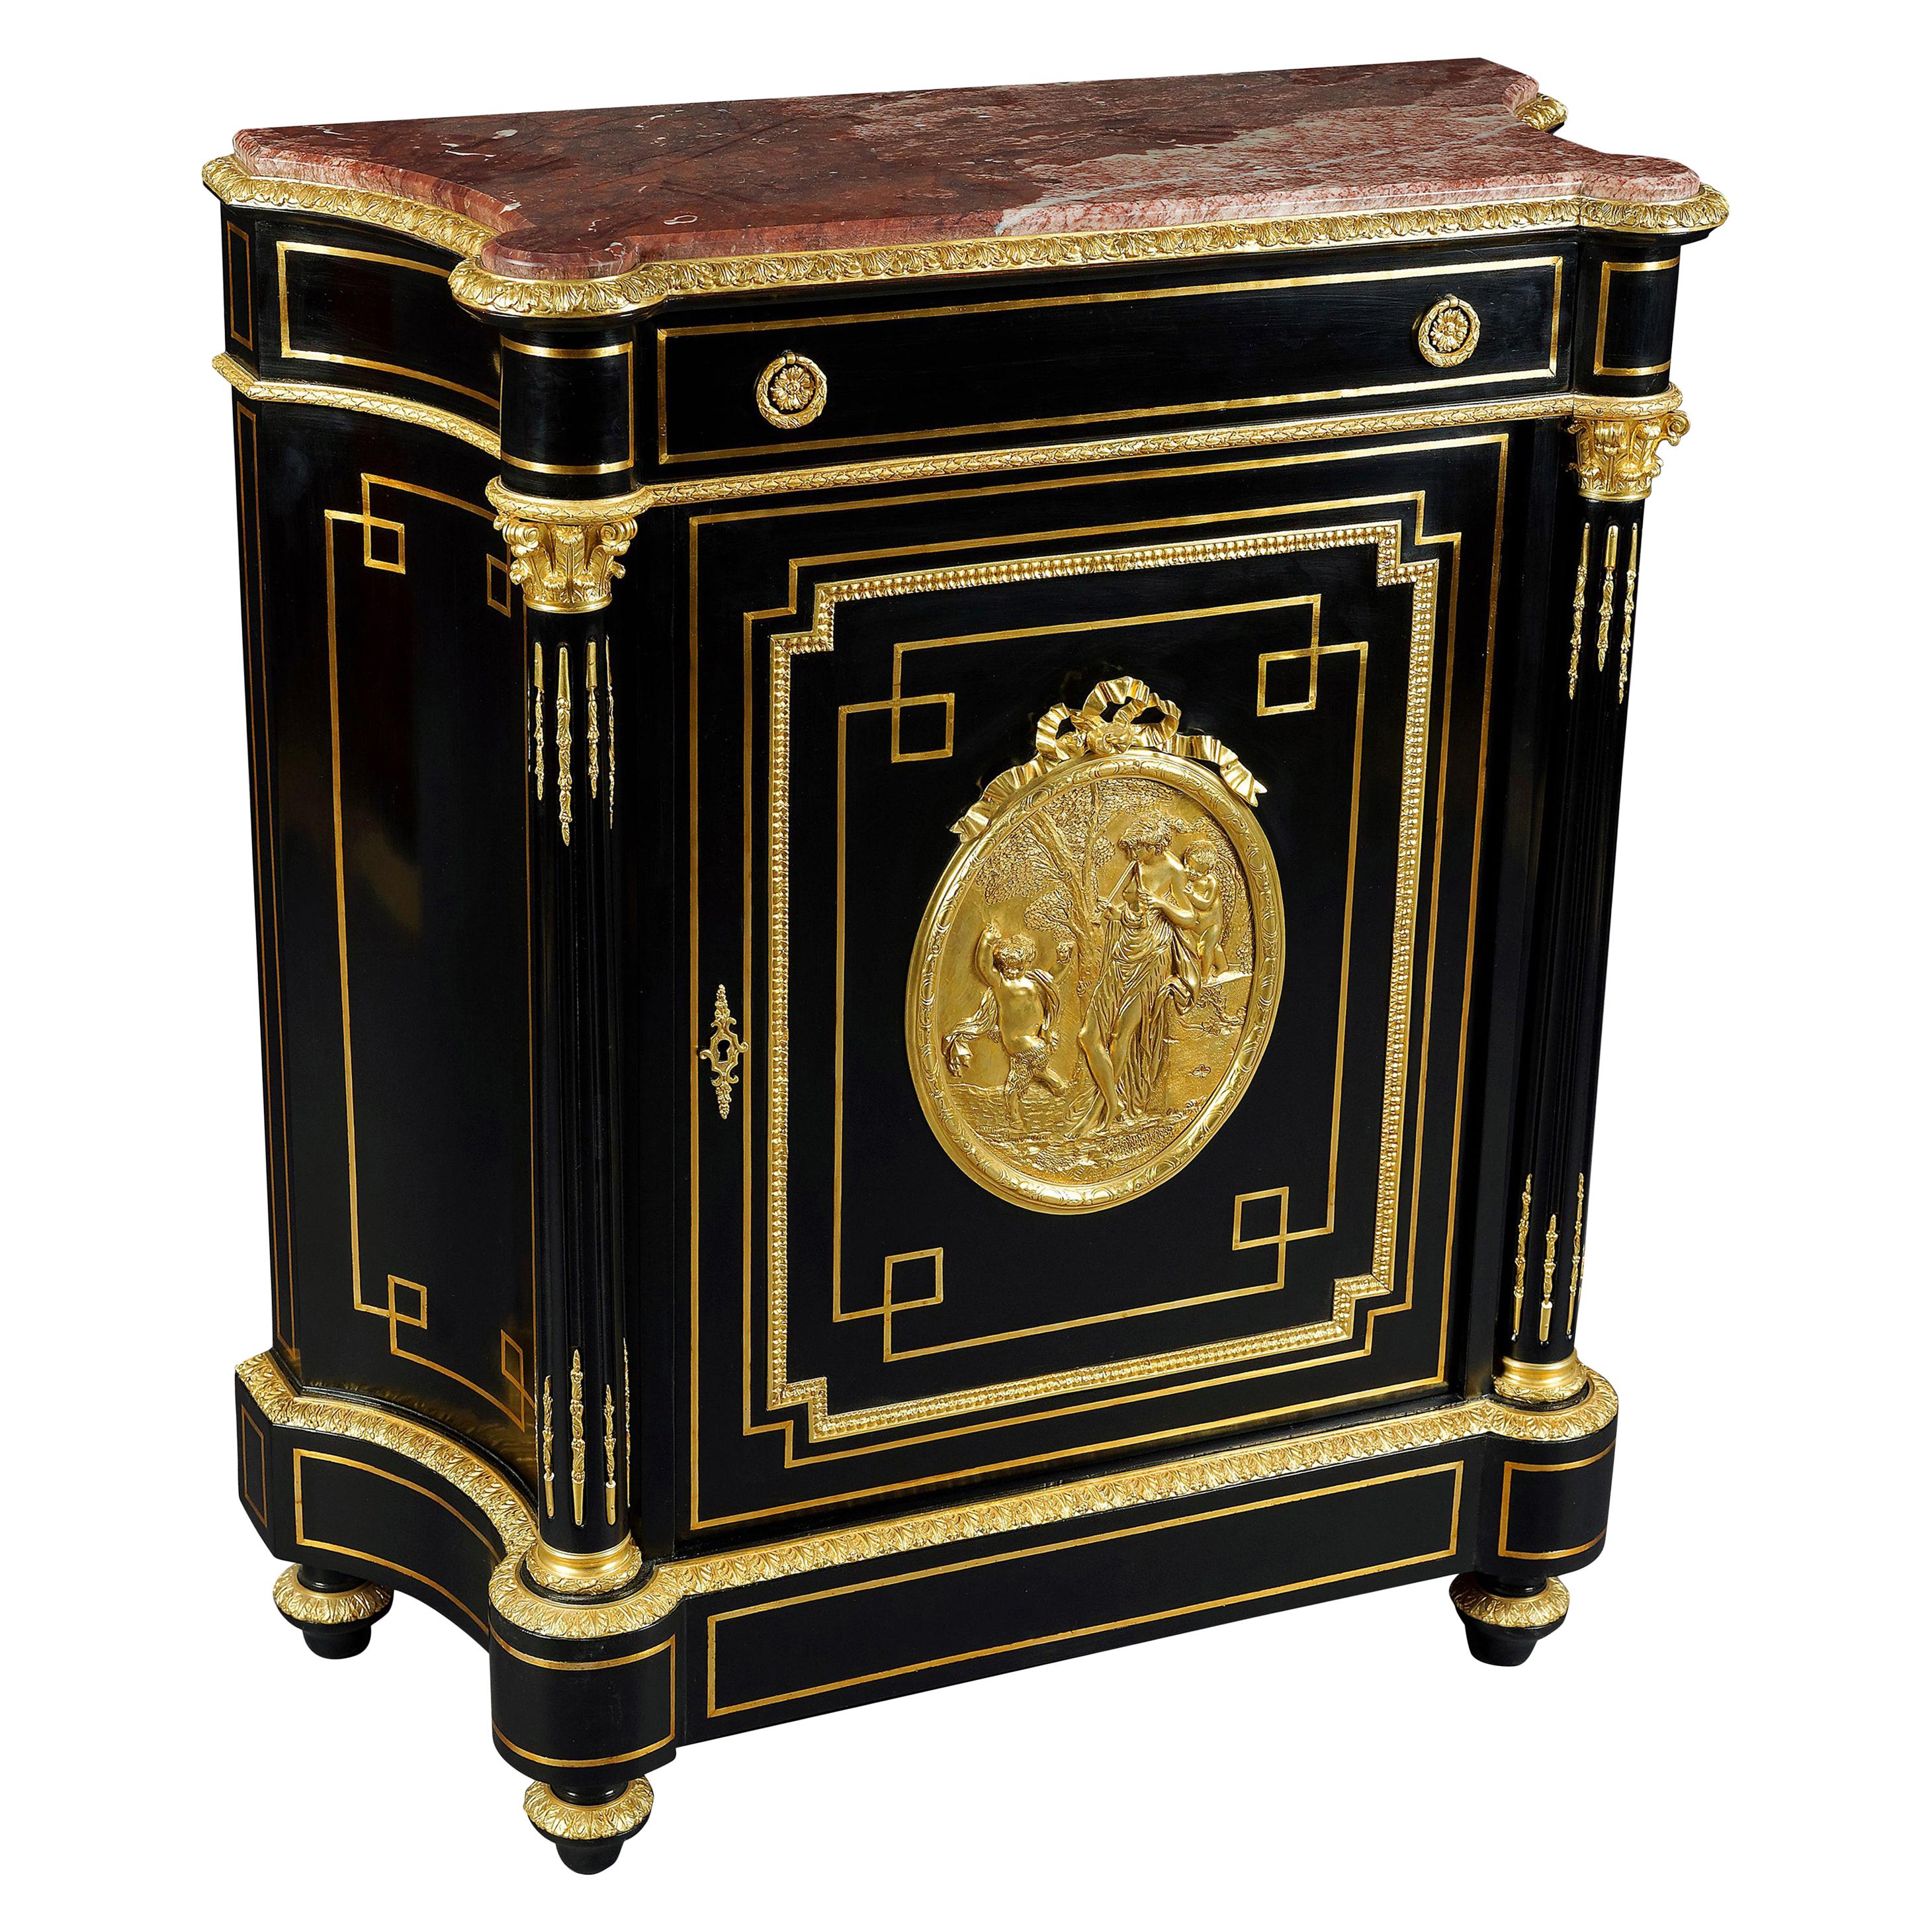 20th Century Louis XV Style Meuble d'appui Cabinet